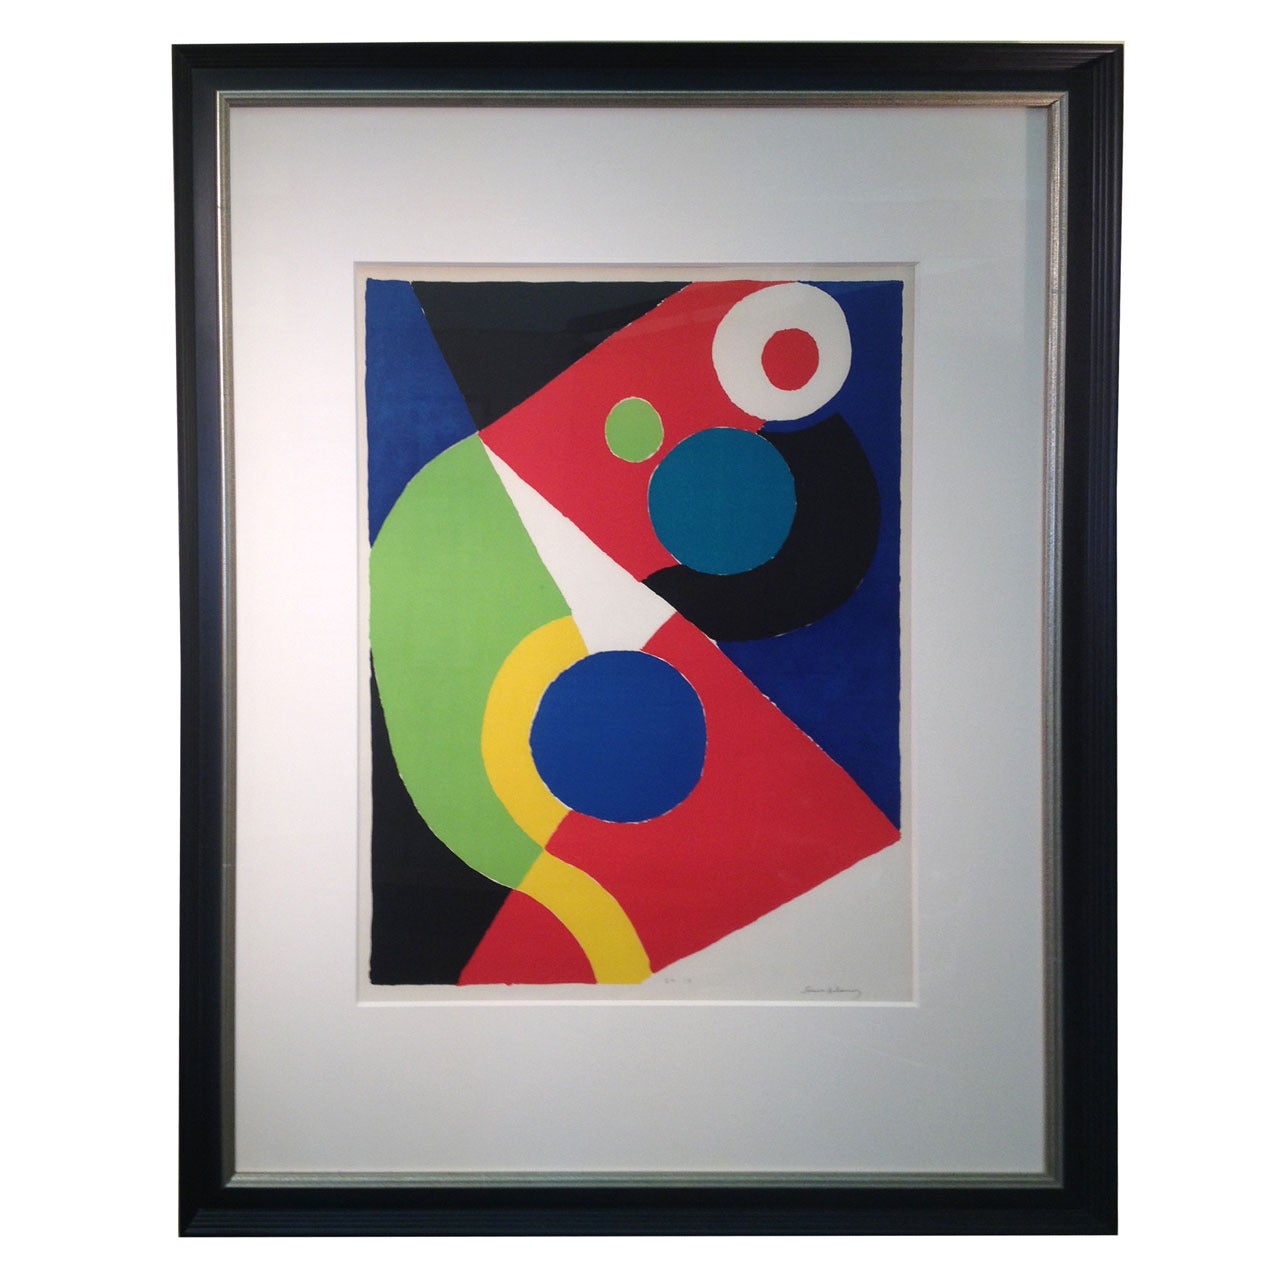 Sonia Delaunay artist proof Lithograph